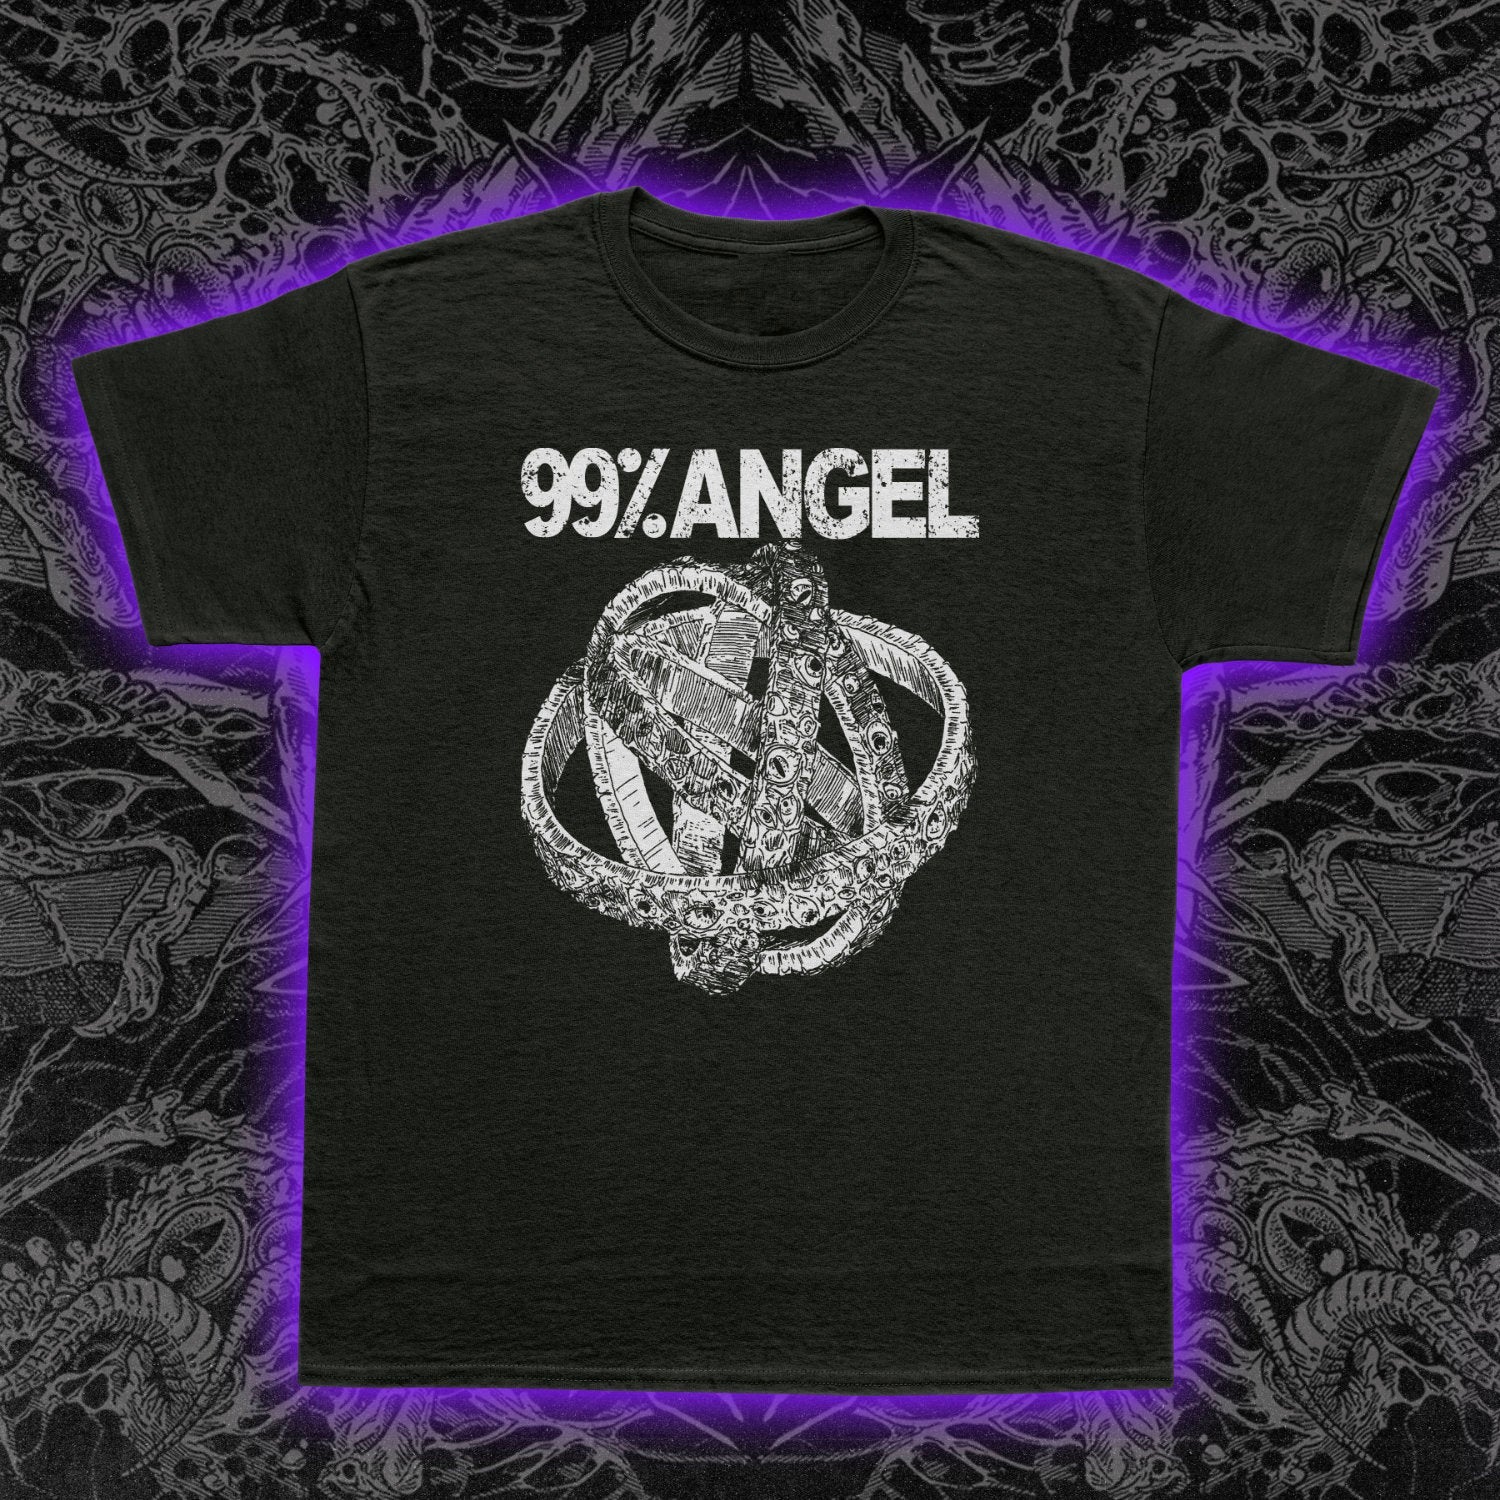 Gothic clothing and occult fashion at The Black Angel online shop